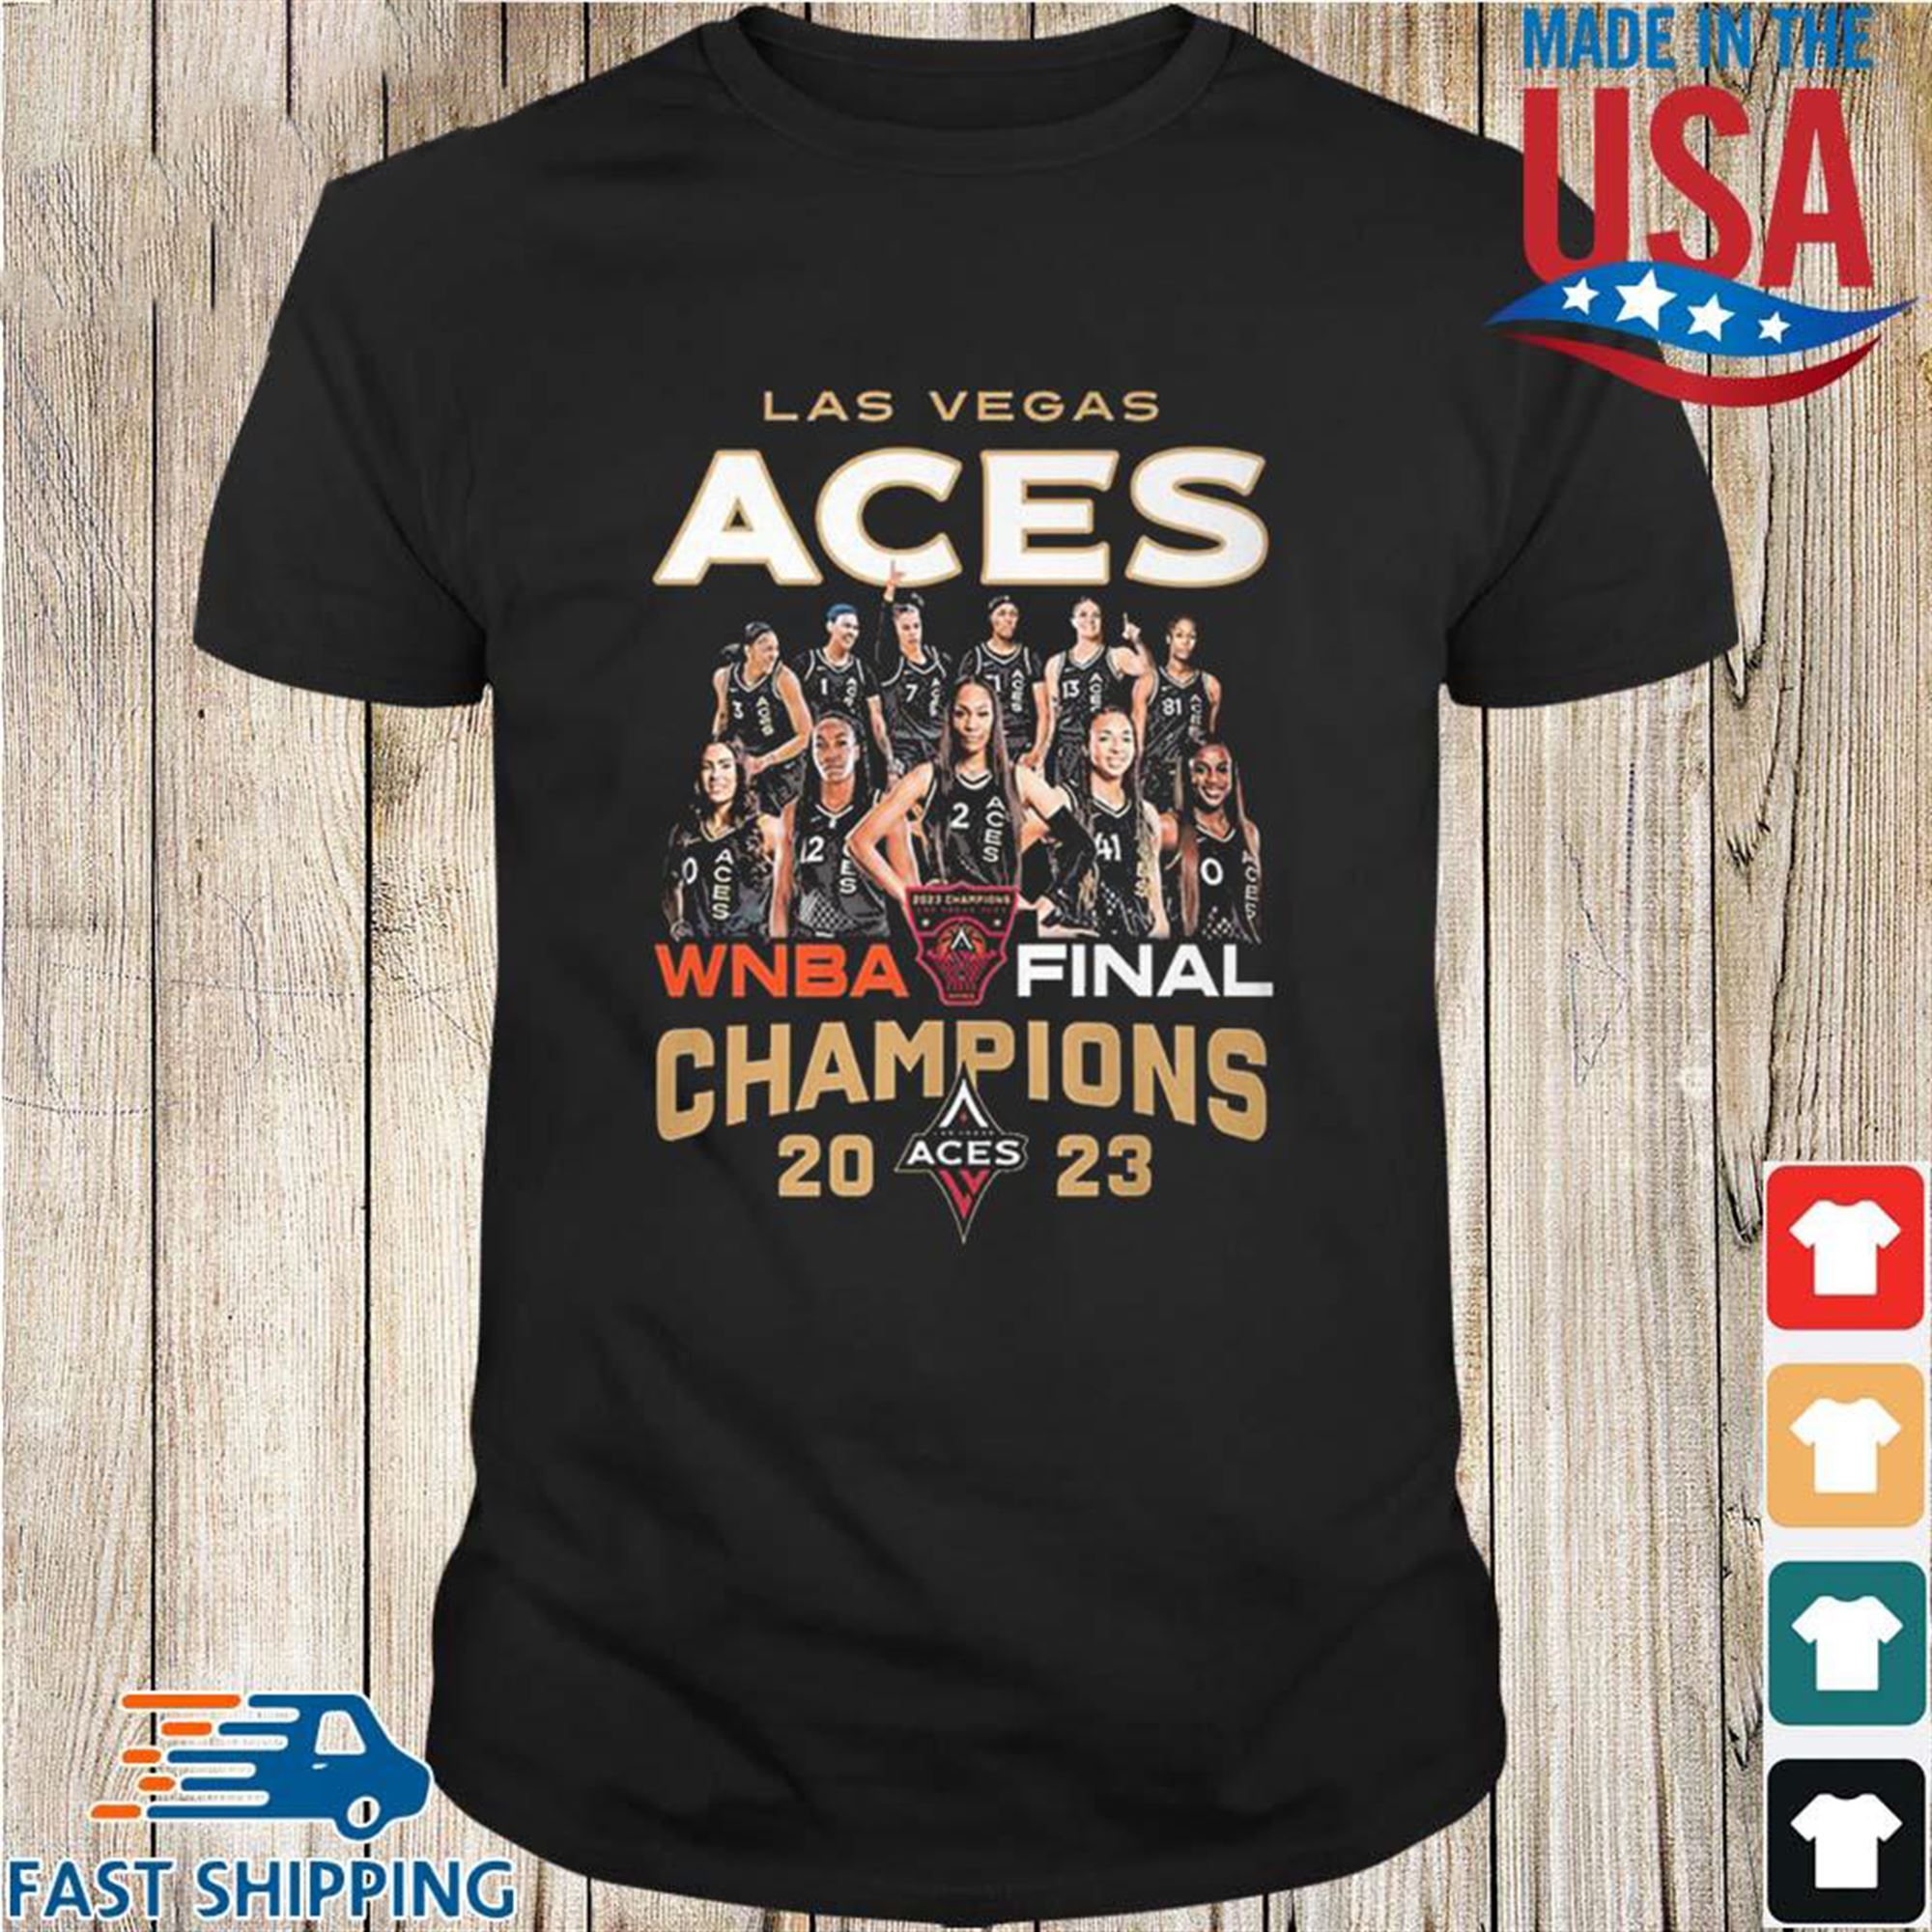 Las Vegas Aces Wnba Finals Champions 2023 T-shirtsweater Hoodie And Long Sleeved Ladies